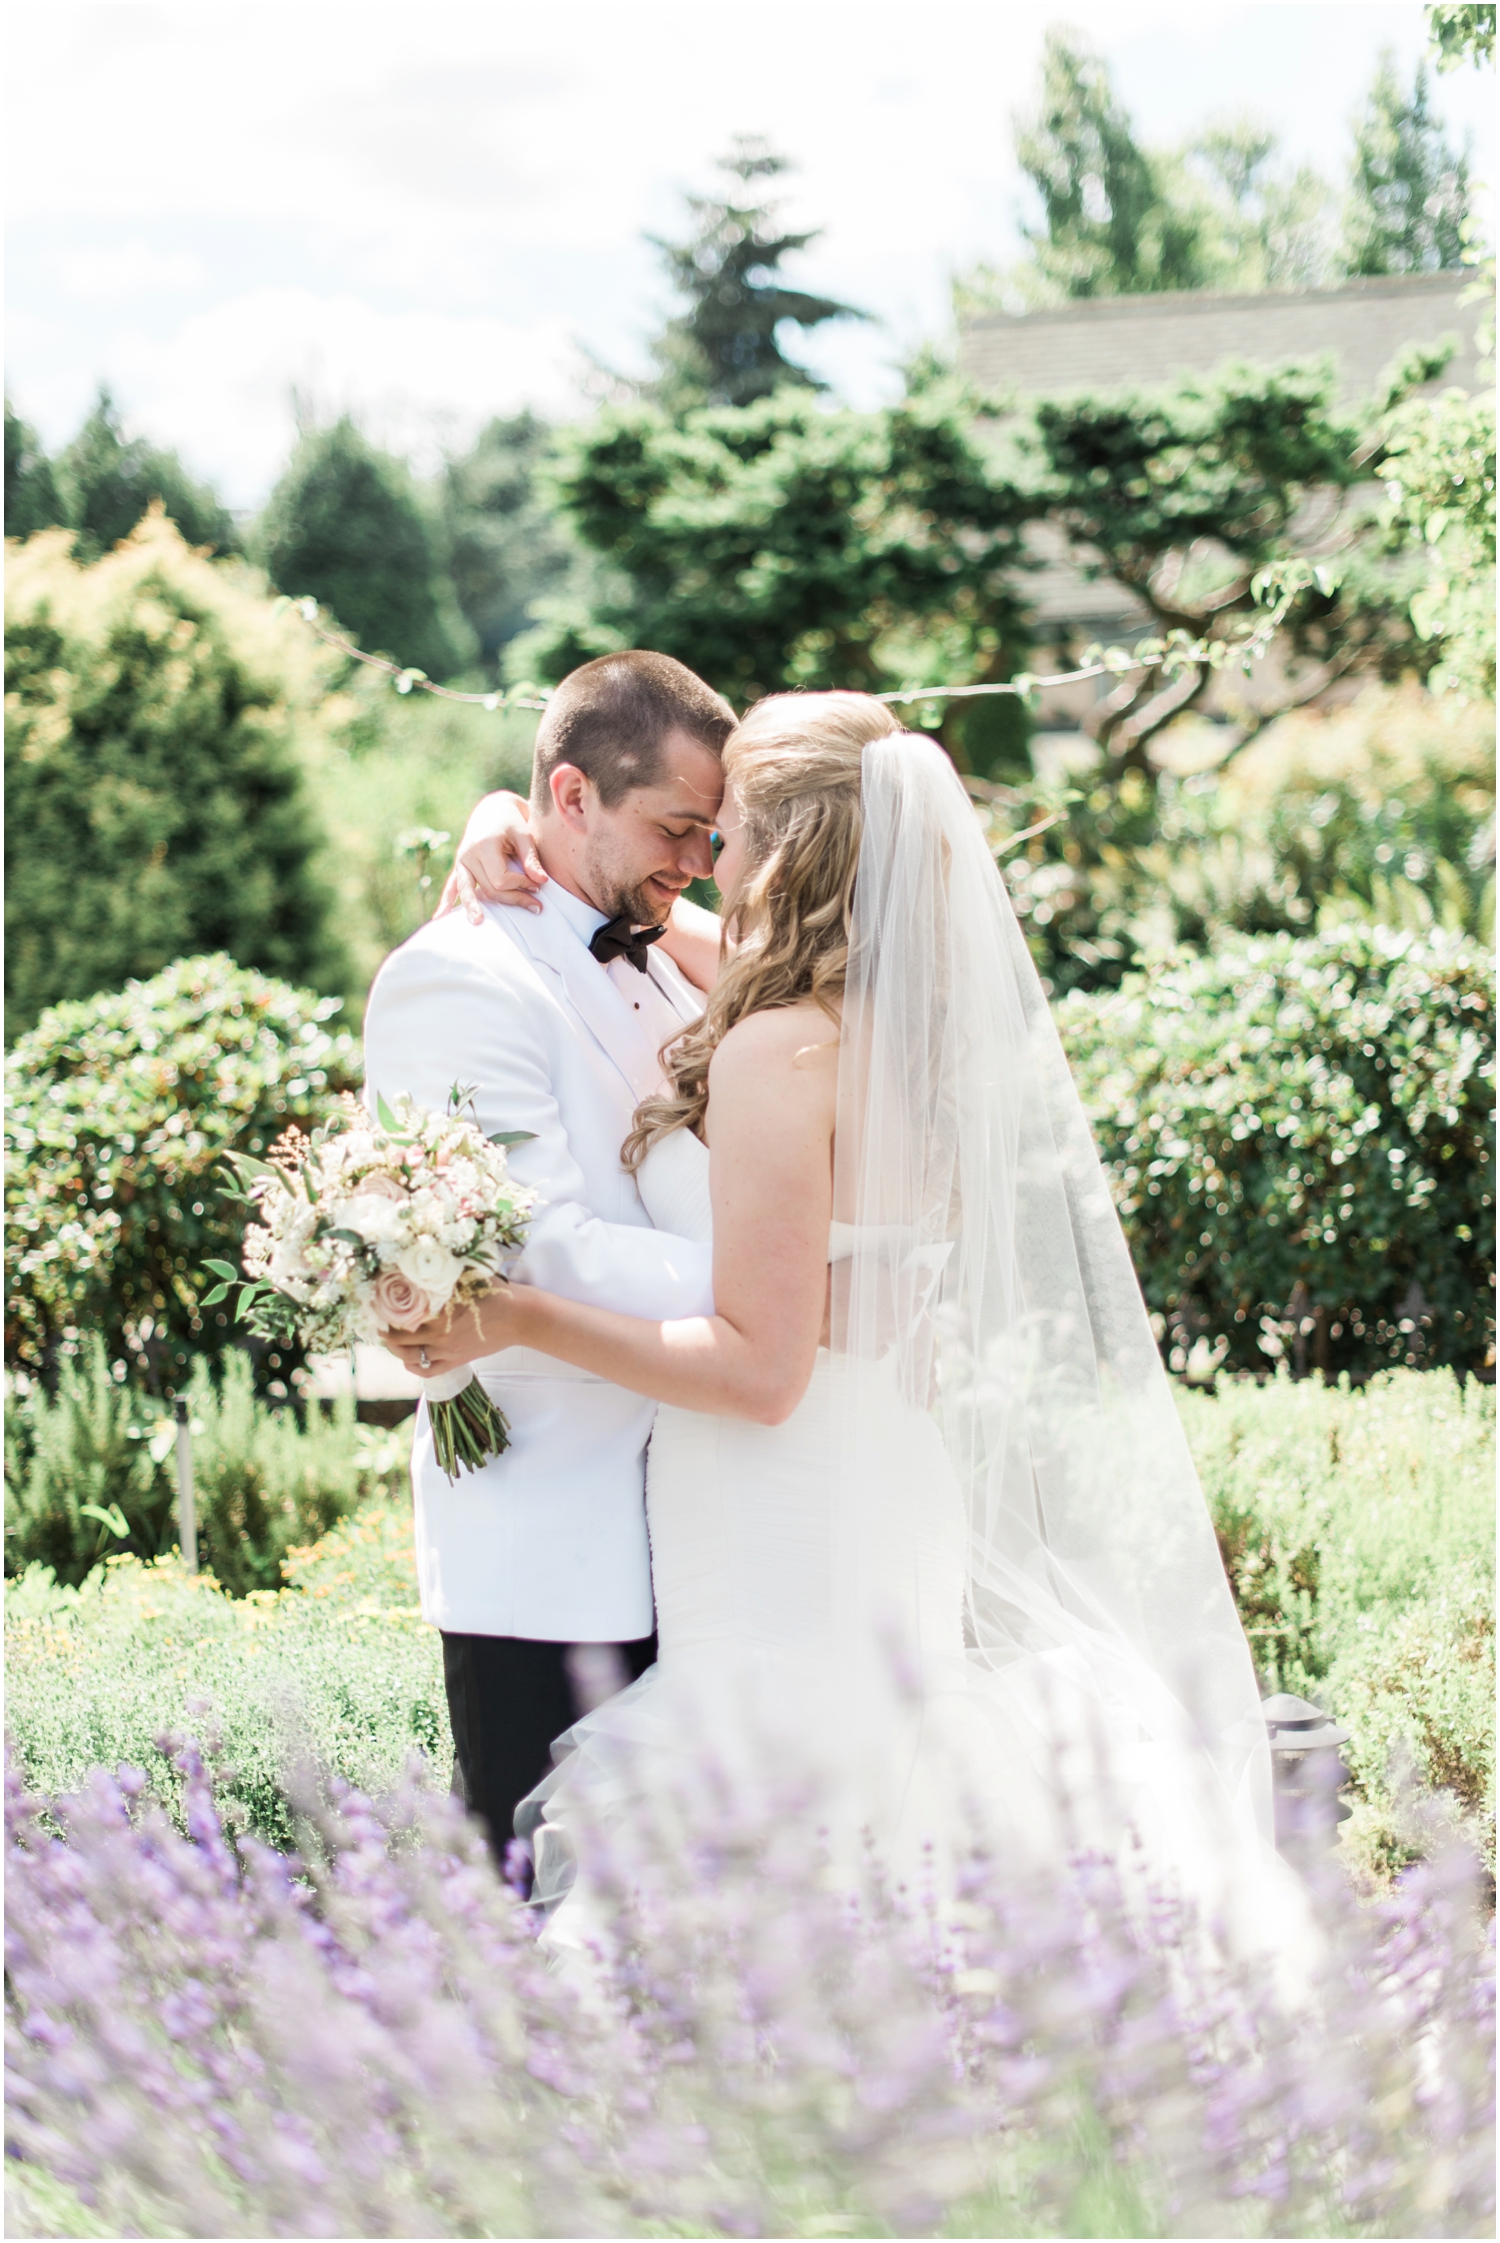 Hannah & Mikes Willows Lodge Wedding. Woodinville wedding Photographer